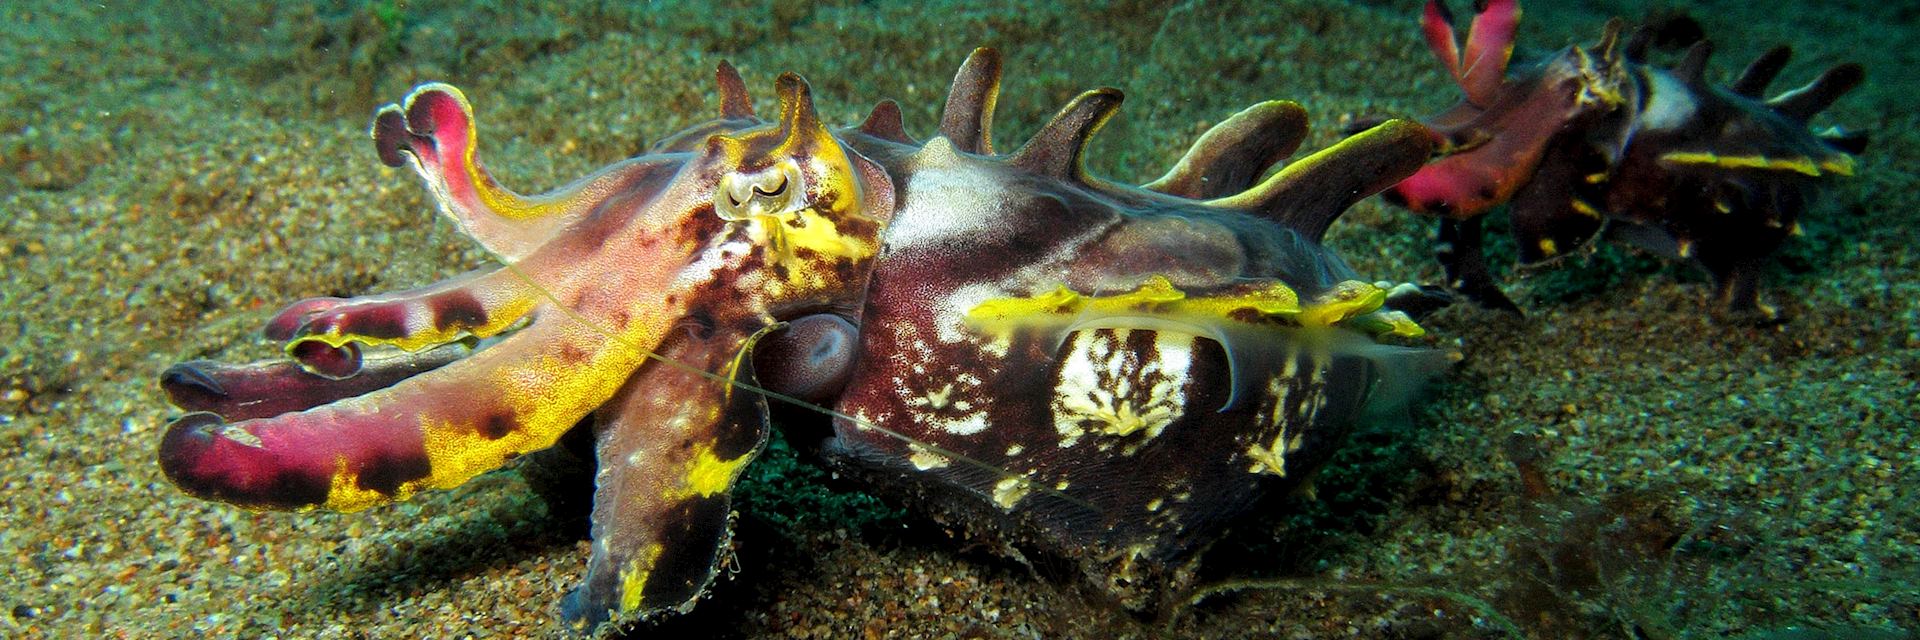 Cuttlefish off the coast of Dauin in the Philippines